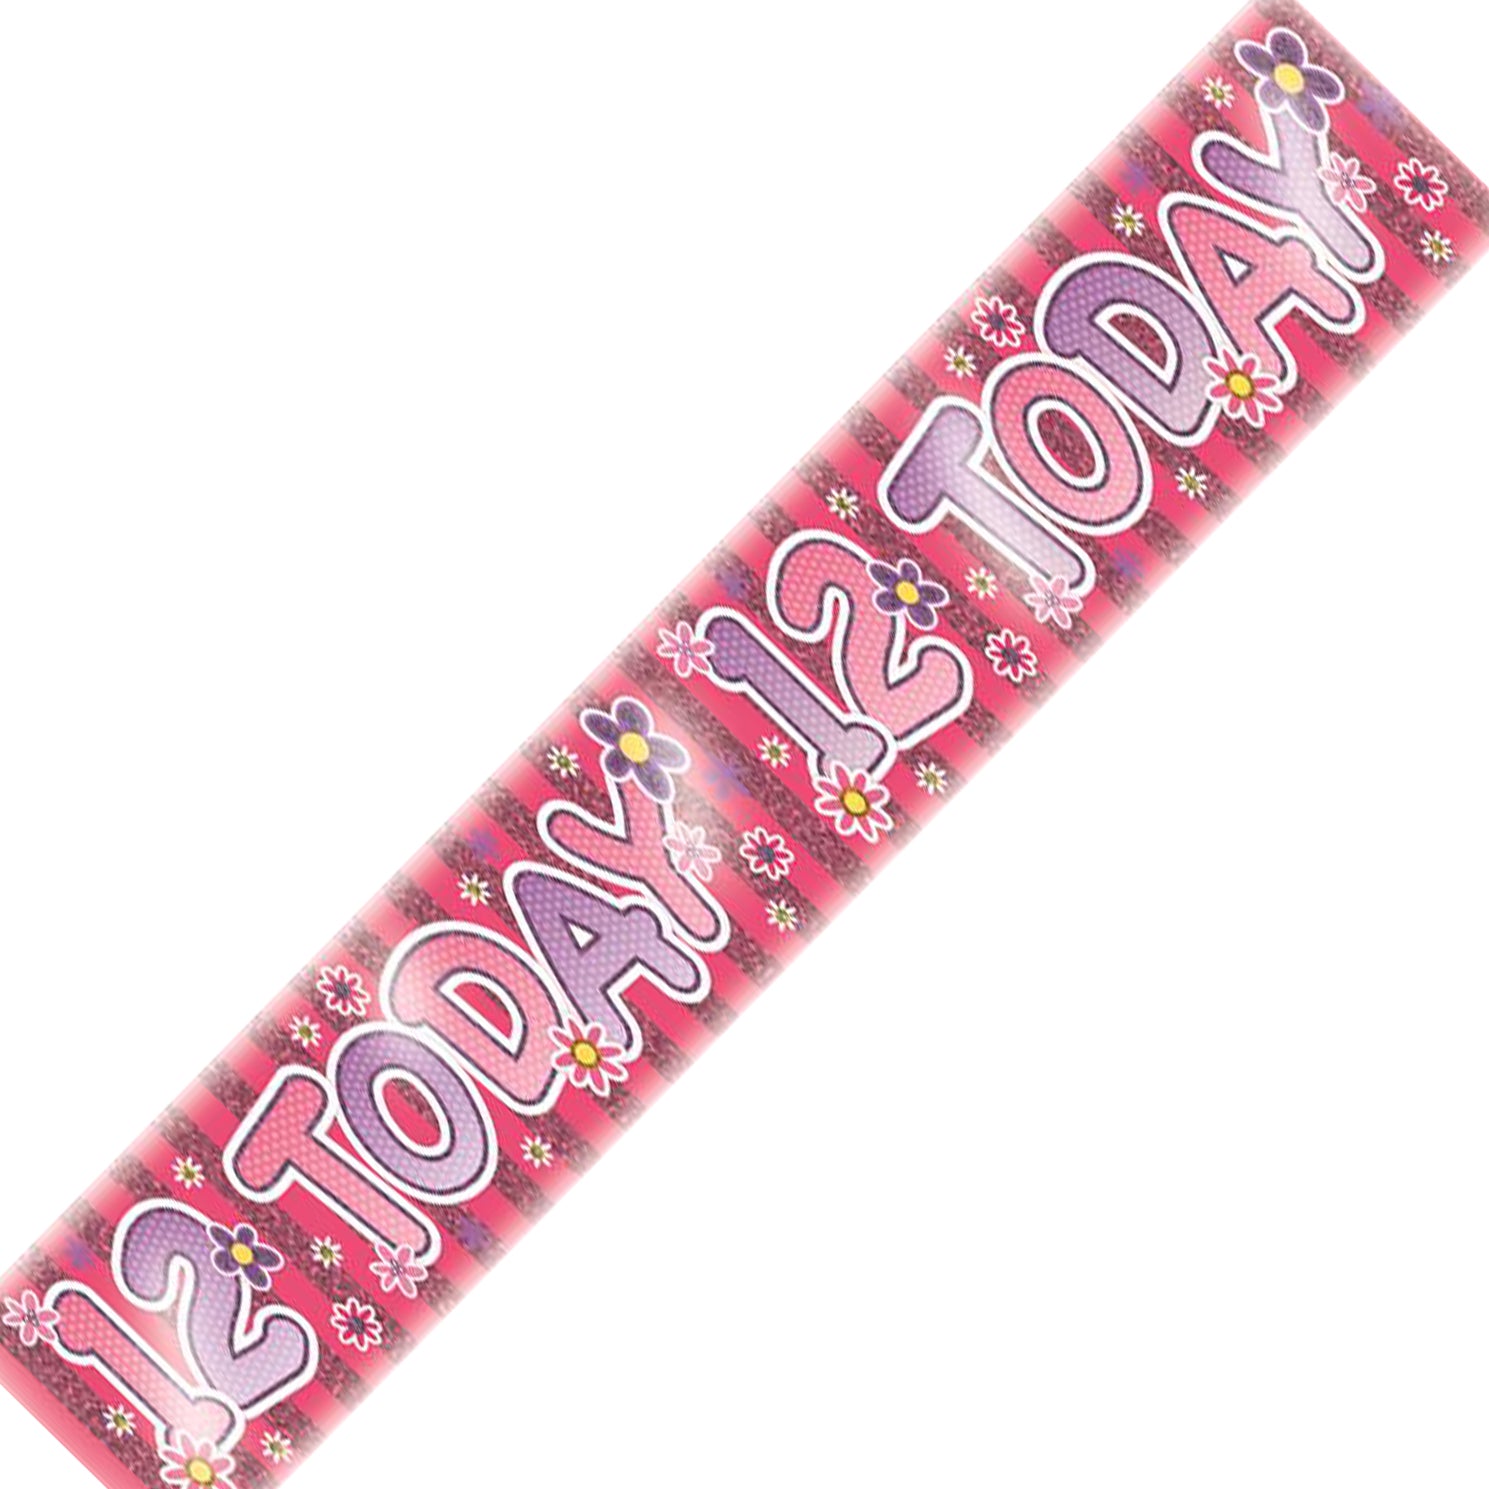 Age 12 Birthday Banner Pink, Purple And Silver Holographic Recyclable 12th Birthday Party Banner